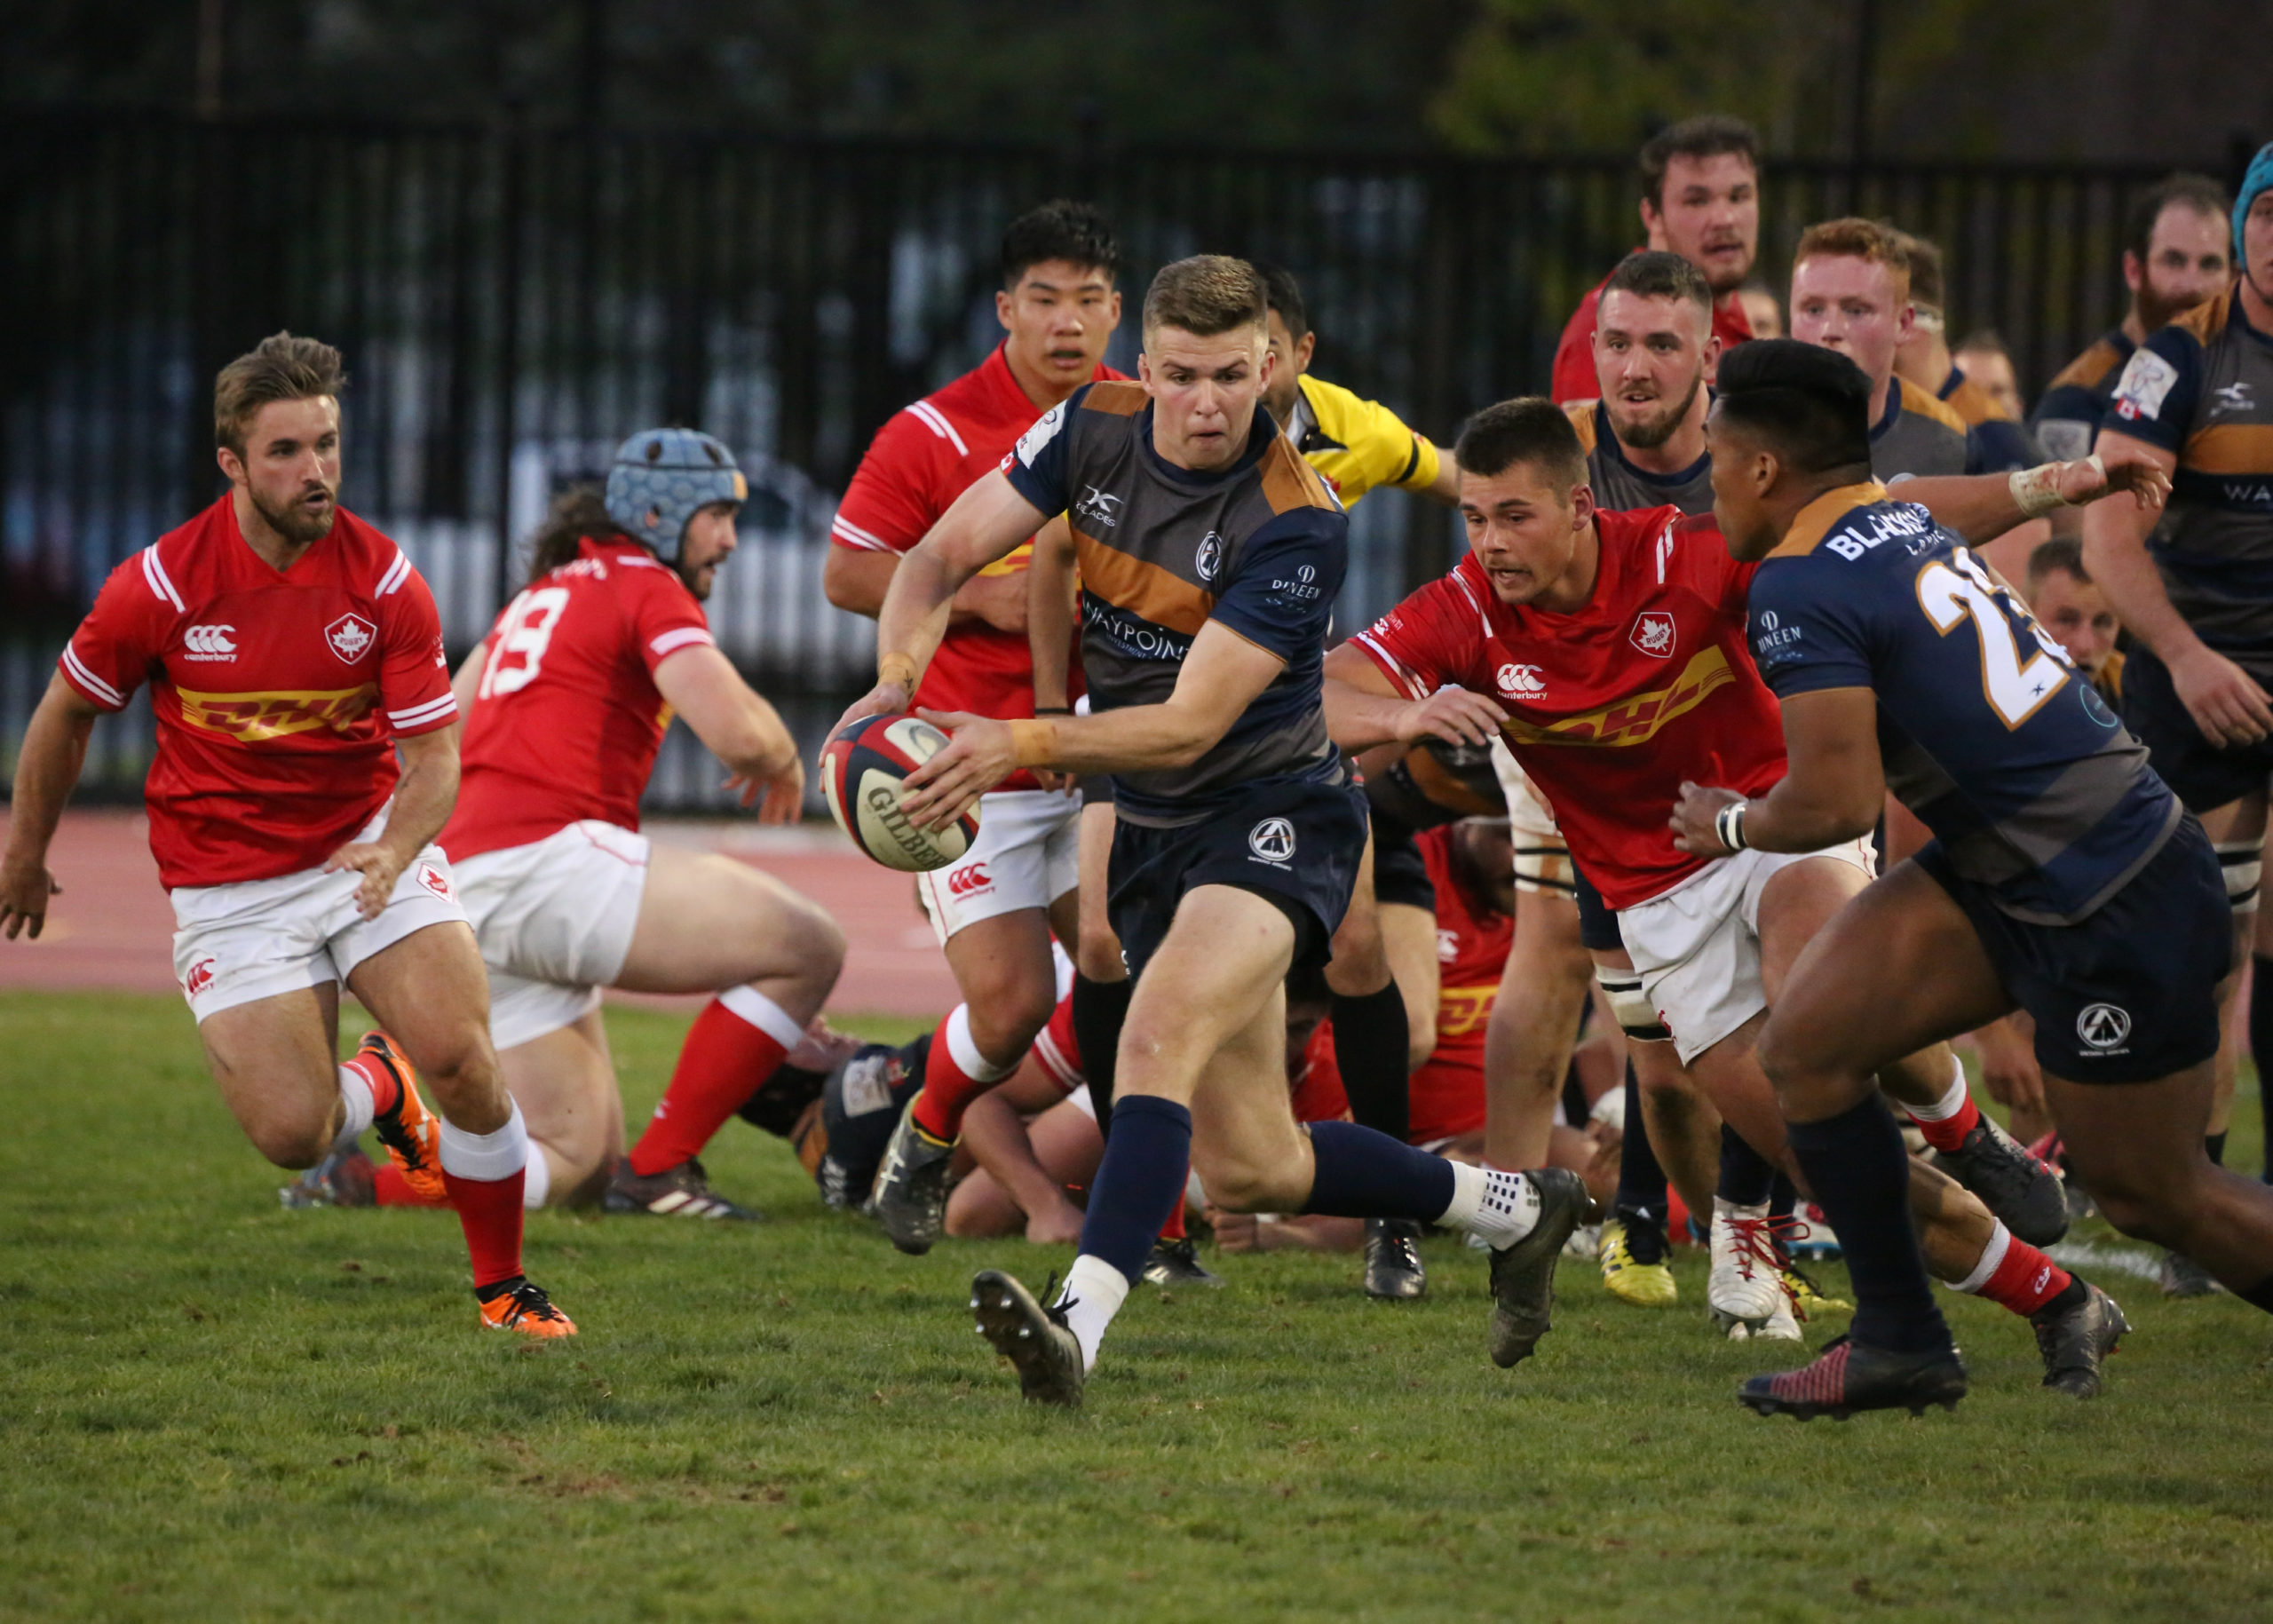 MATCH REPORT: Arrows Drop Spring Series Opener to Canada Selects